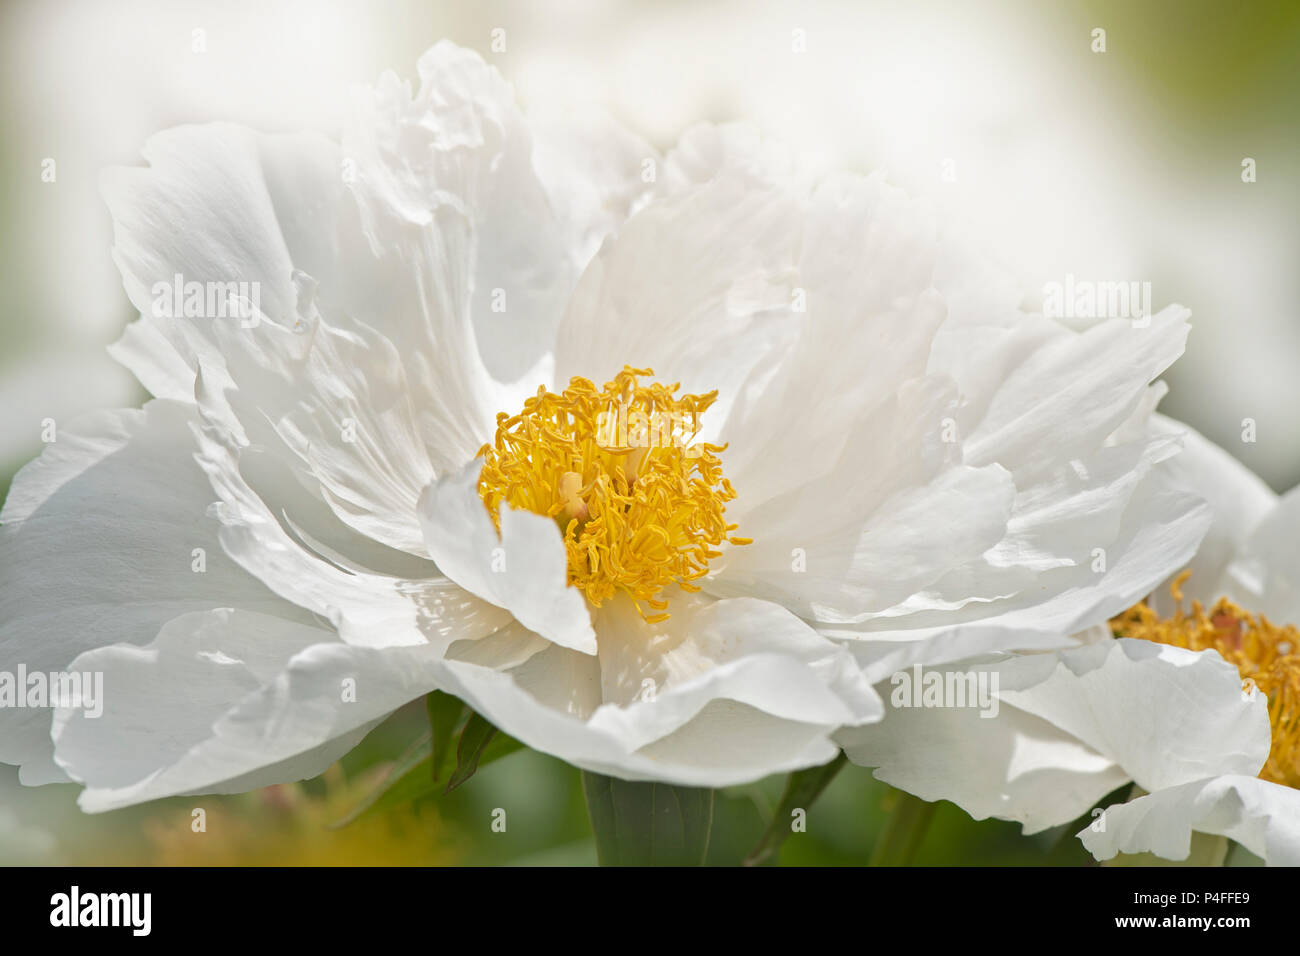 Close-up image of a beautiful white, summer flowering Peony flower Stock Photo